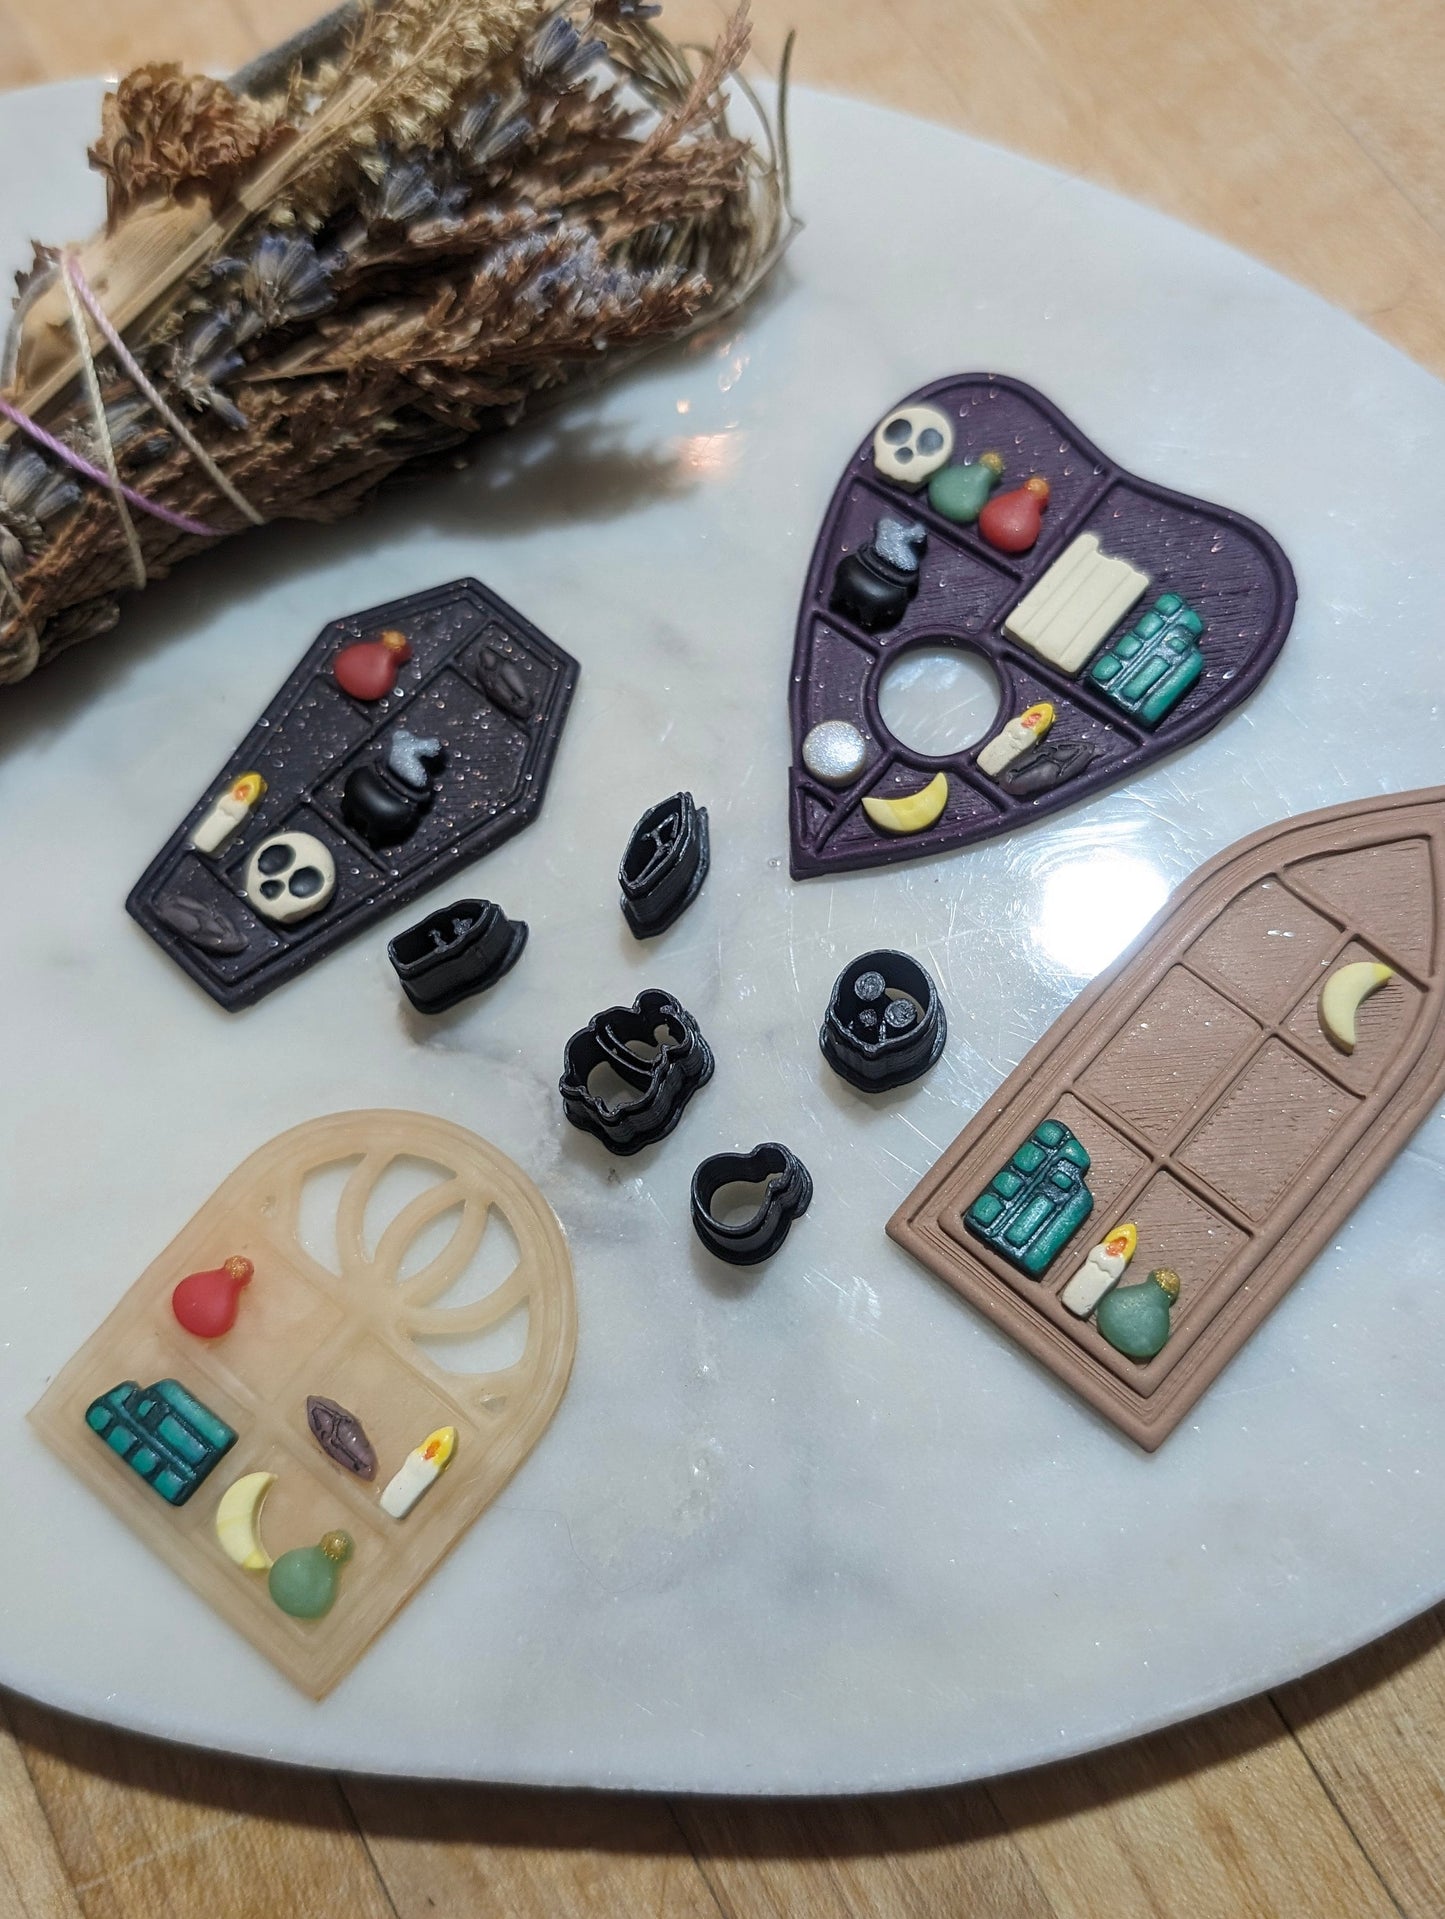 Set of 5 Micro Shelf and Window Sized Sharp Clay Cutters Including a Crystal, Cauldron, Skull, Candle, and Potion Bottle